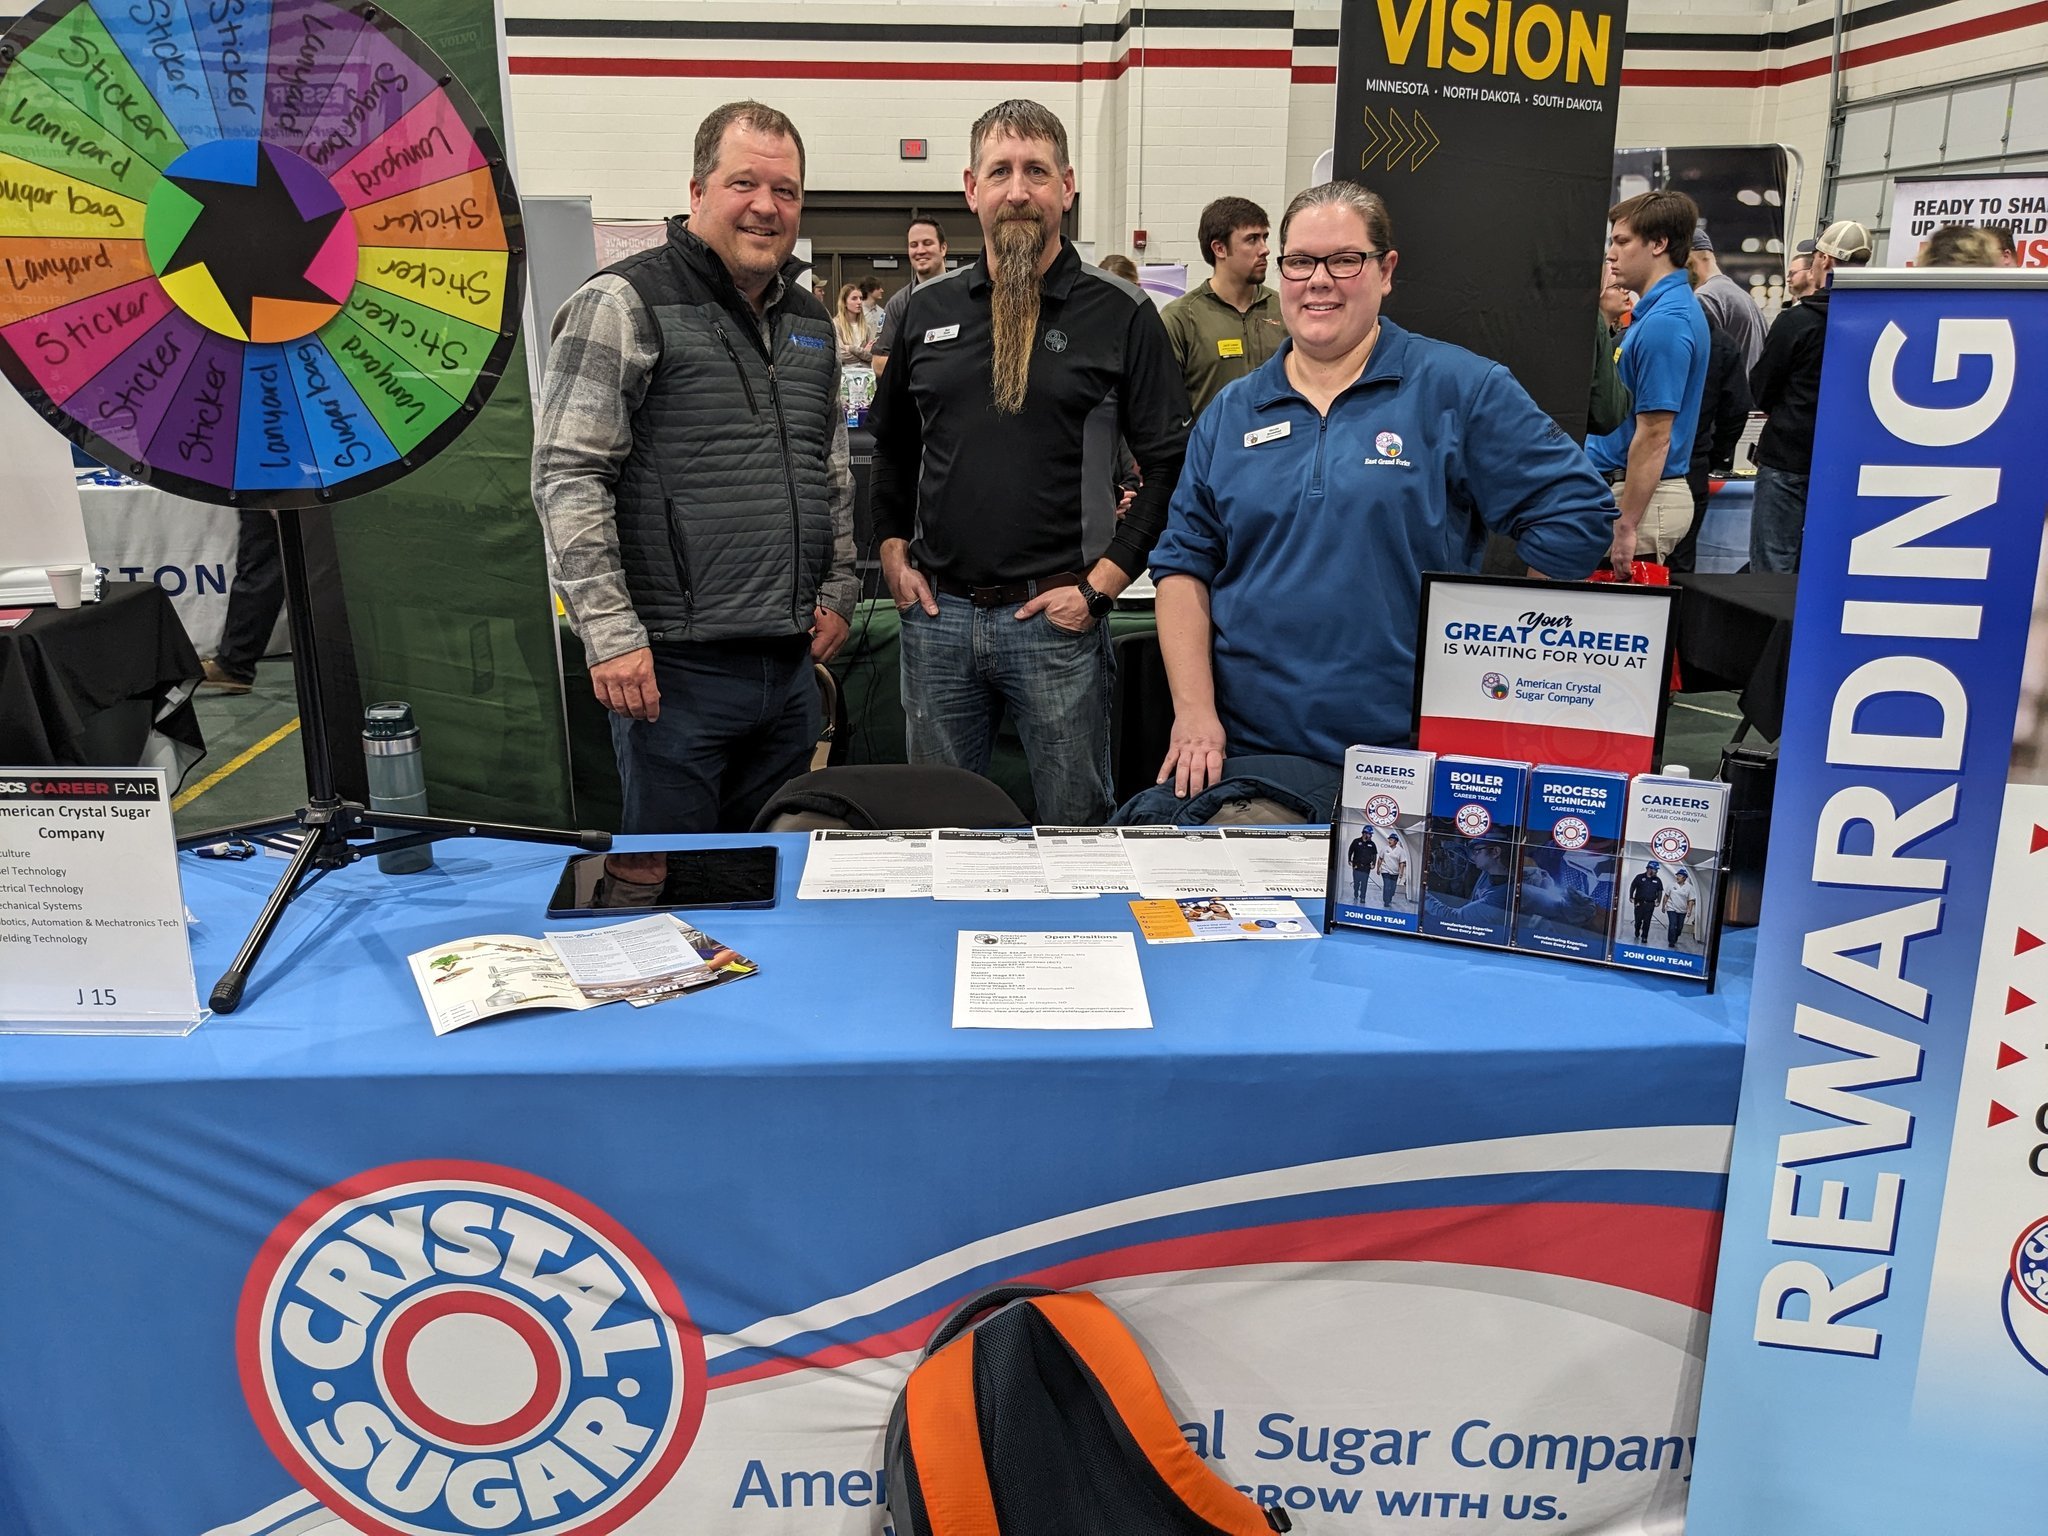 A Golden Path employee at two American Crystal Sugar employees are pictured at the American Crystal Sugar table at the NDSCS Career Fair